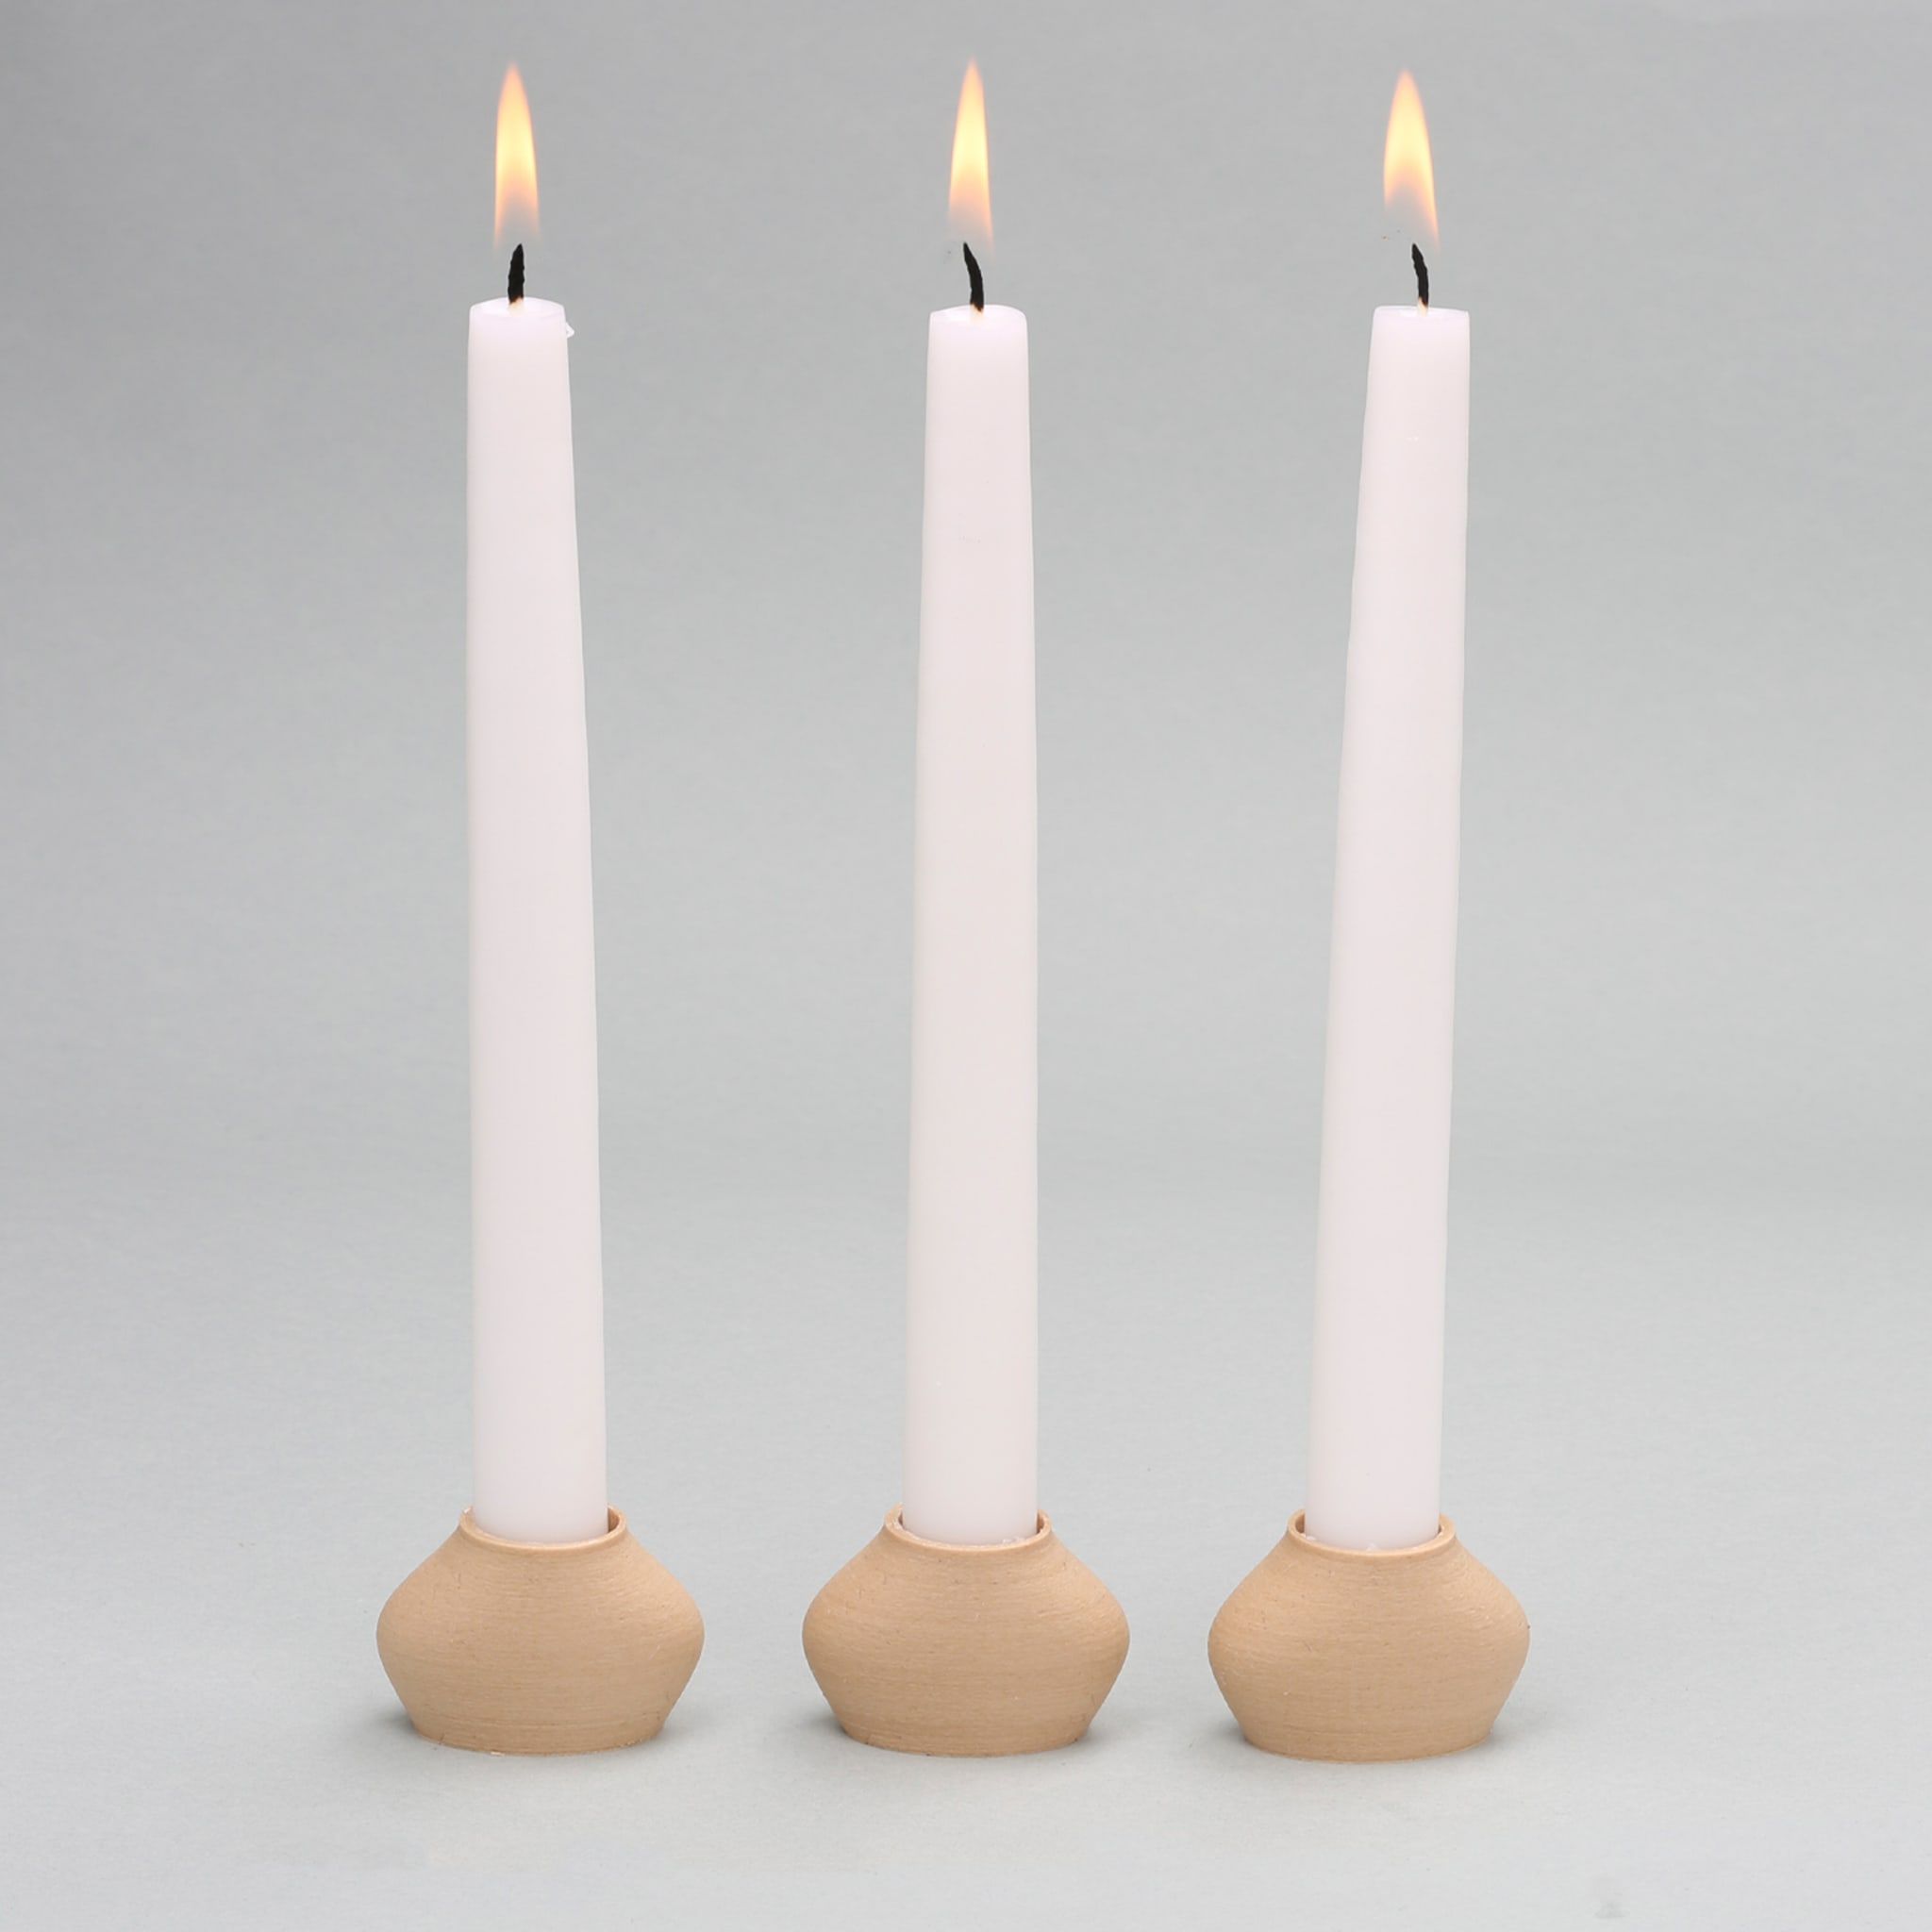 SIRENA ENTRY SET OF 6 WOOD CANDLE HOLDERS - Alternative view 3